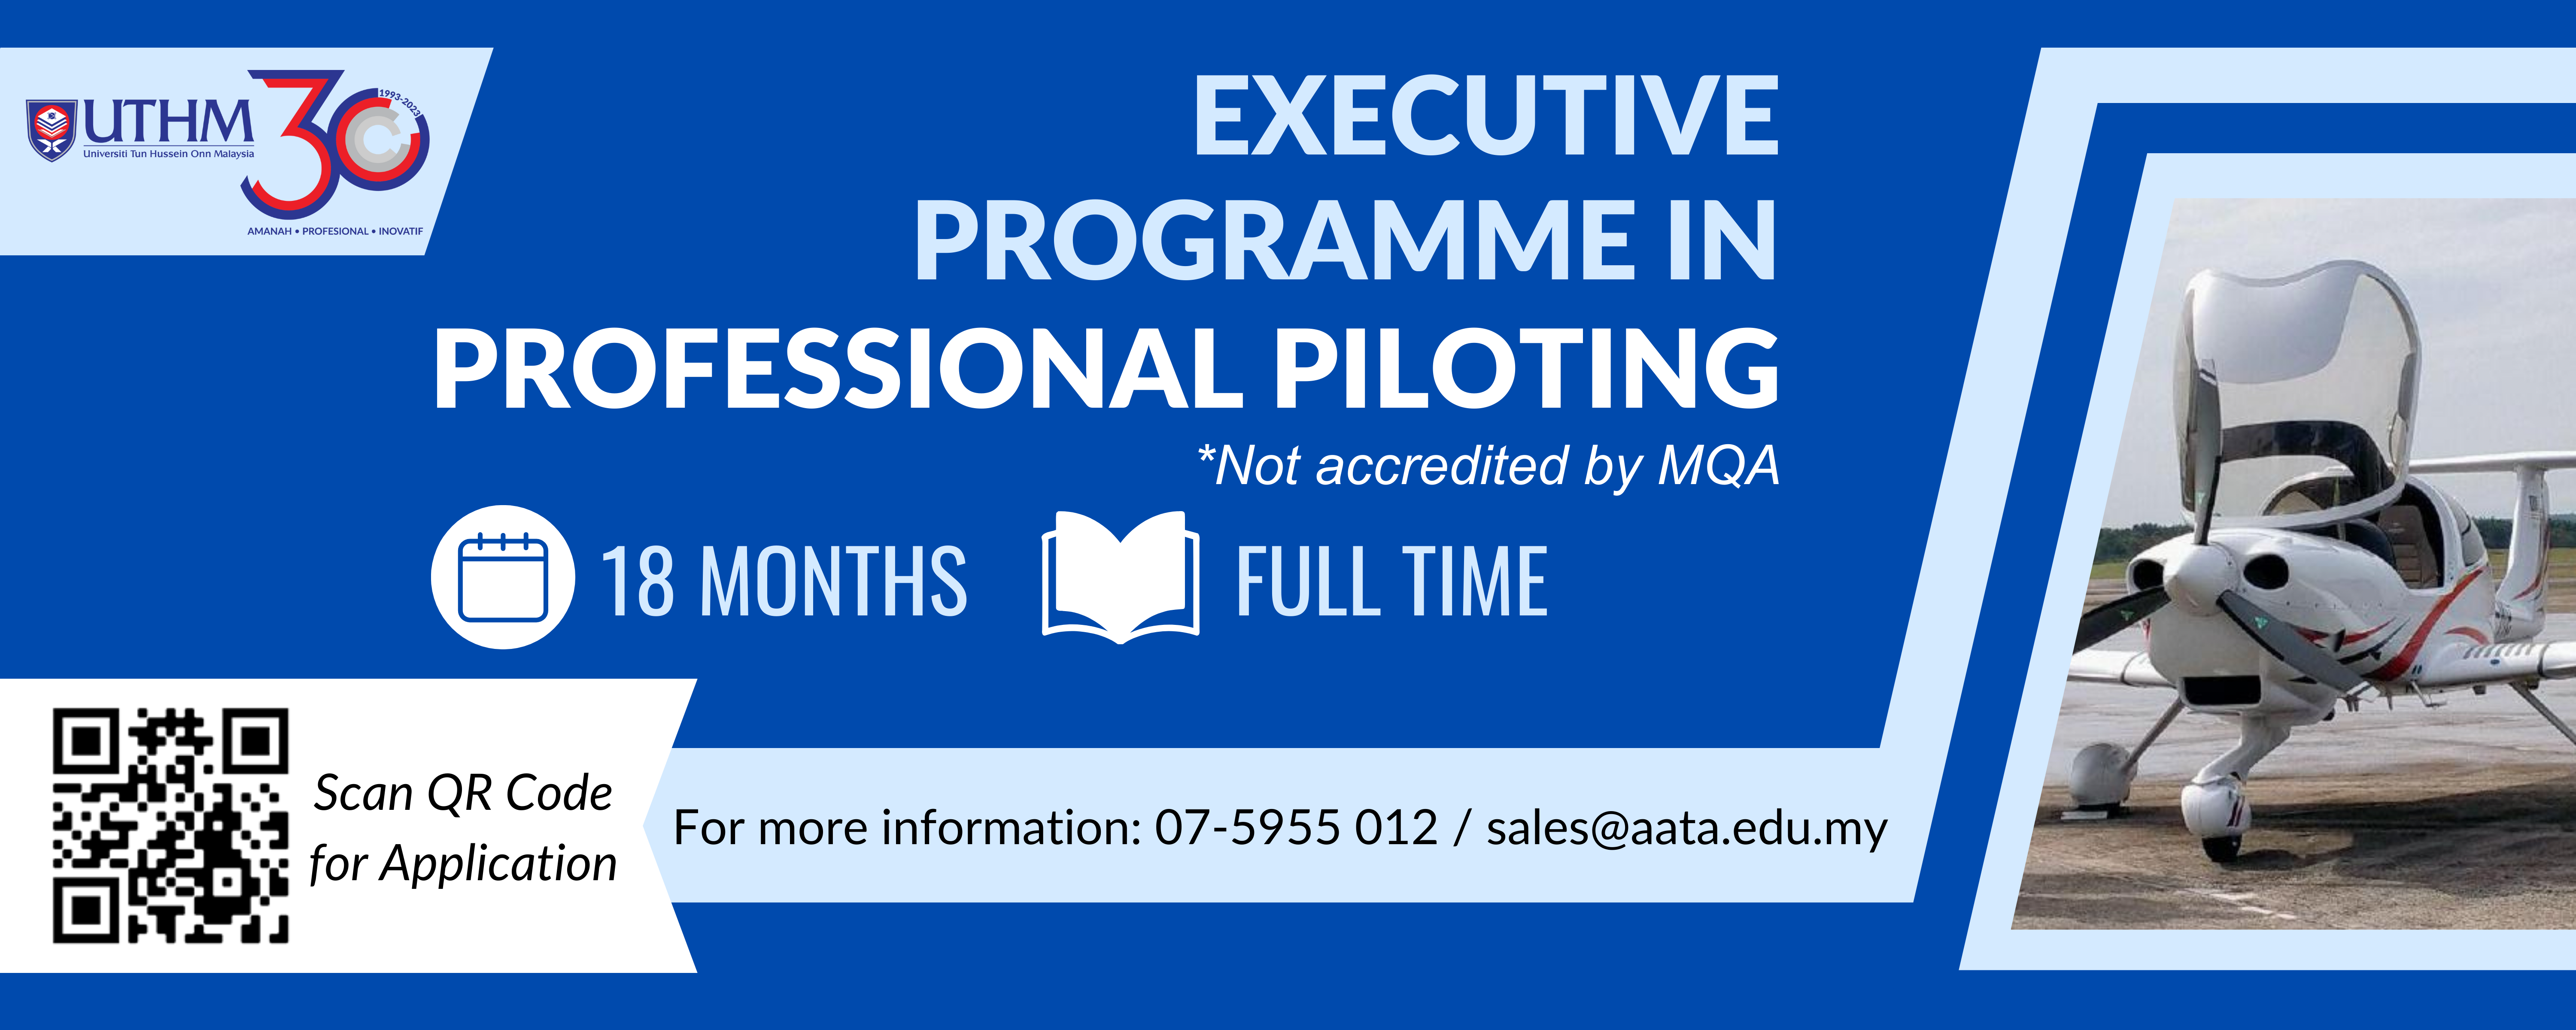 EXECUTIVE PROGRAMME IN PROFESSIONAL PILOTING